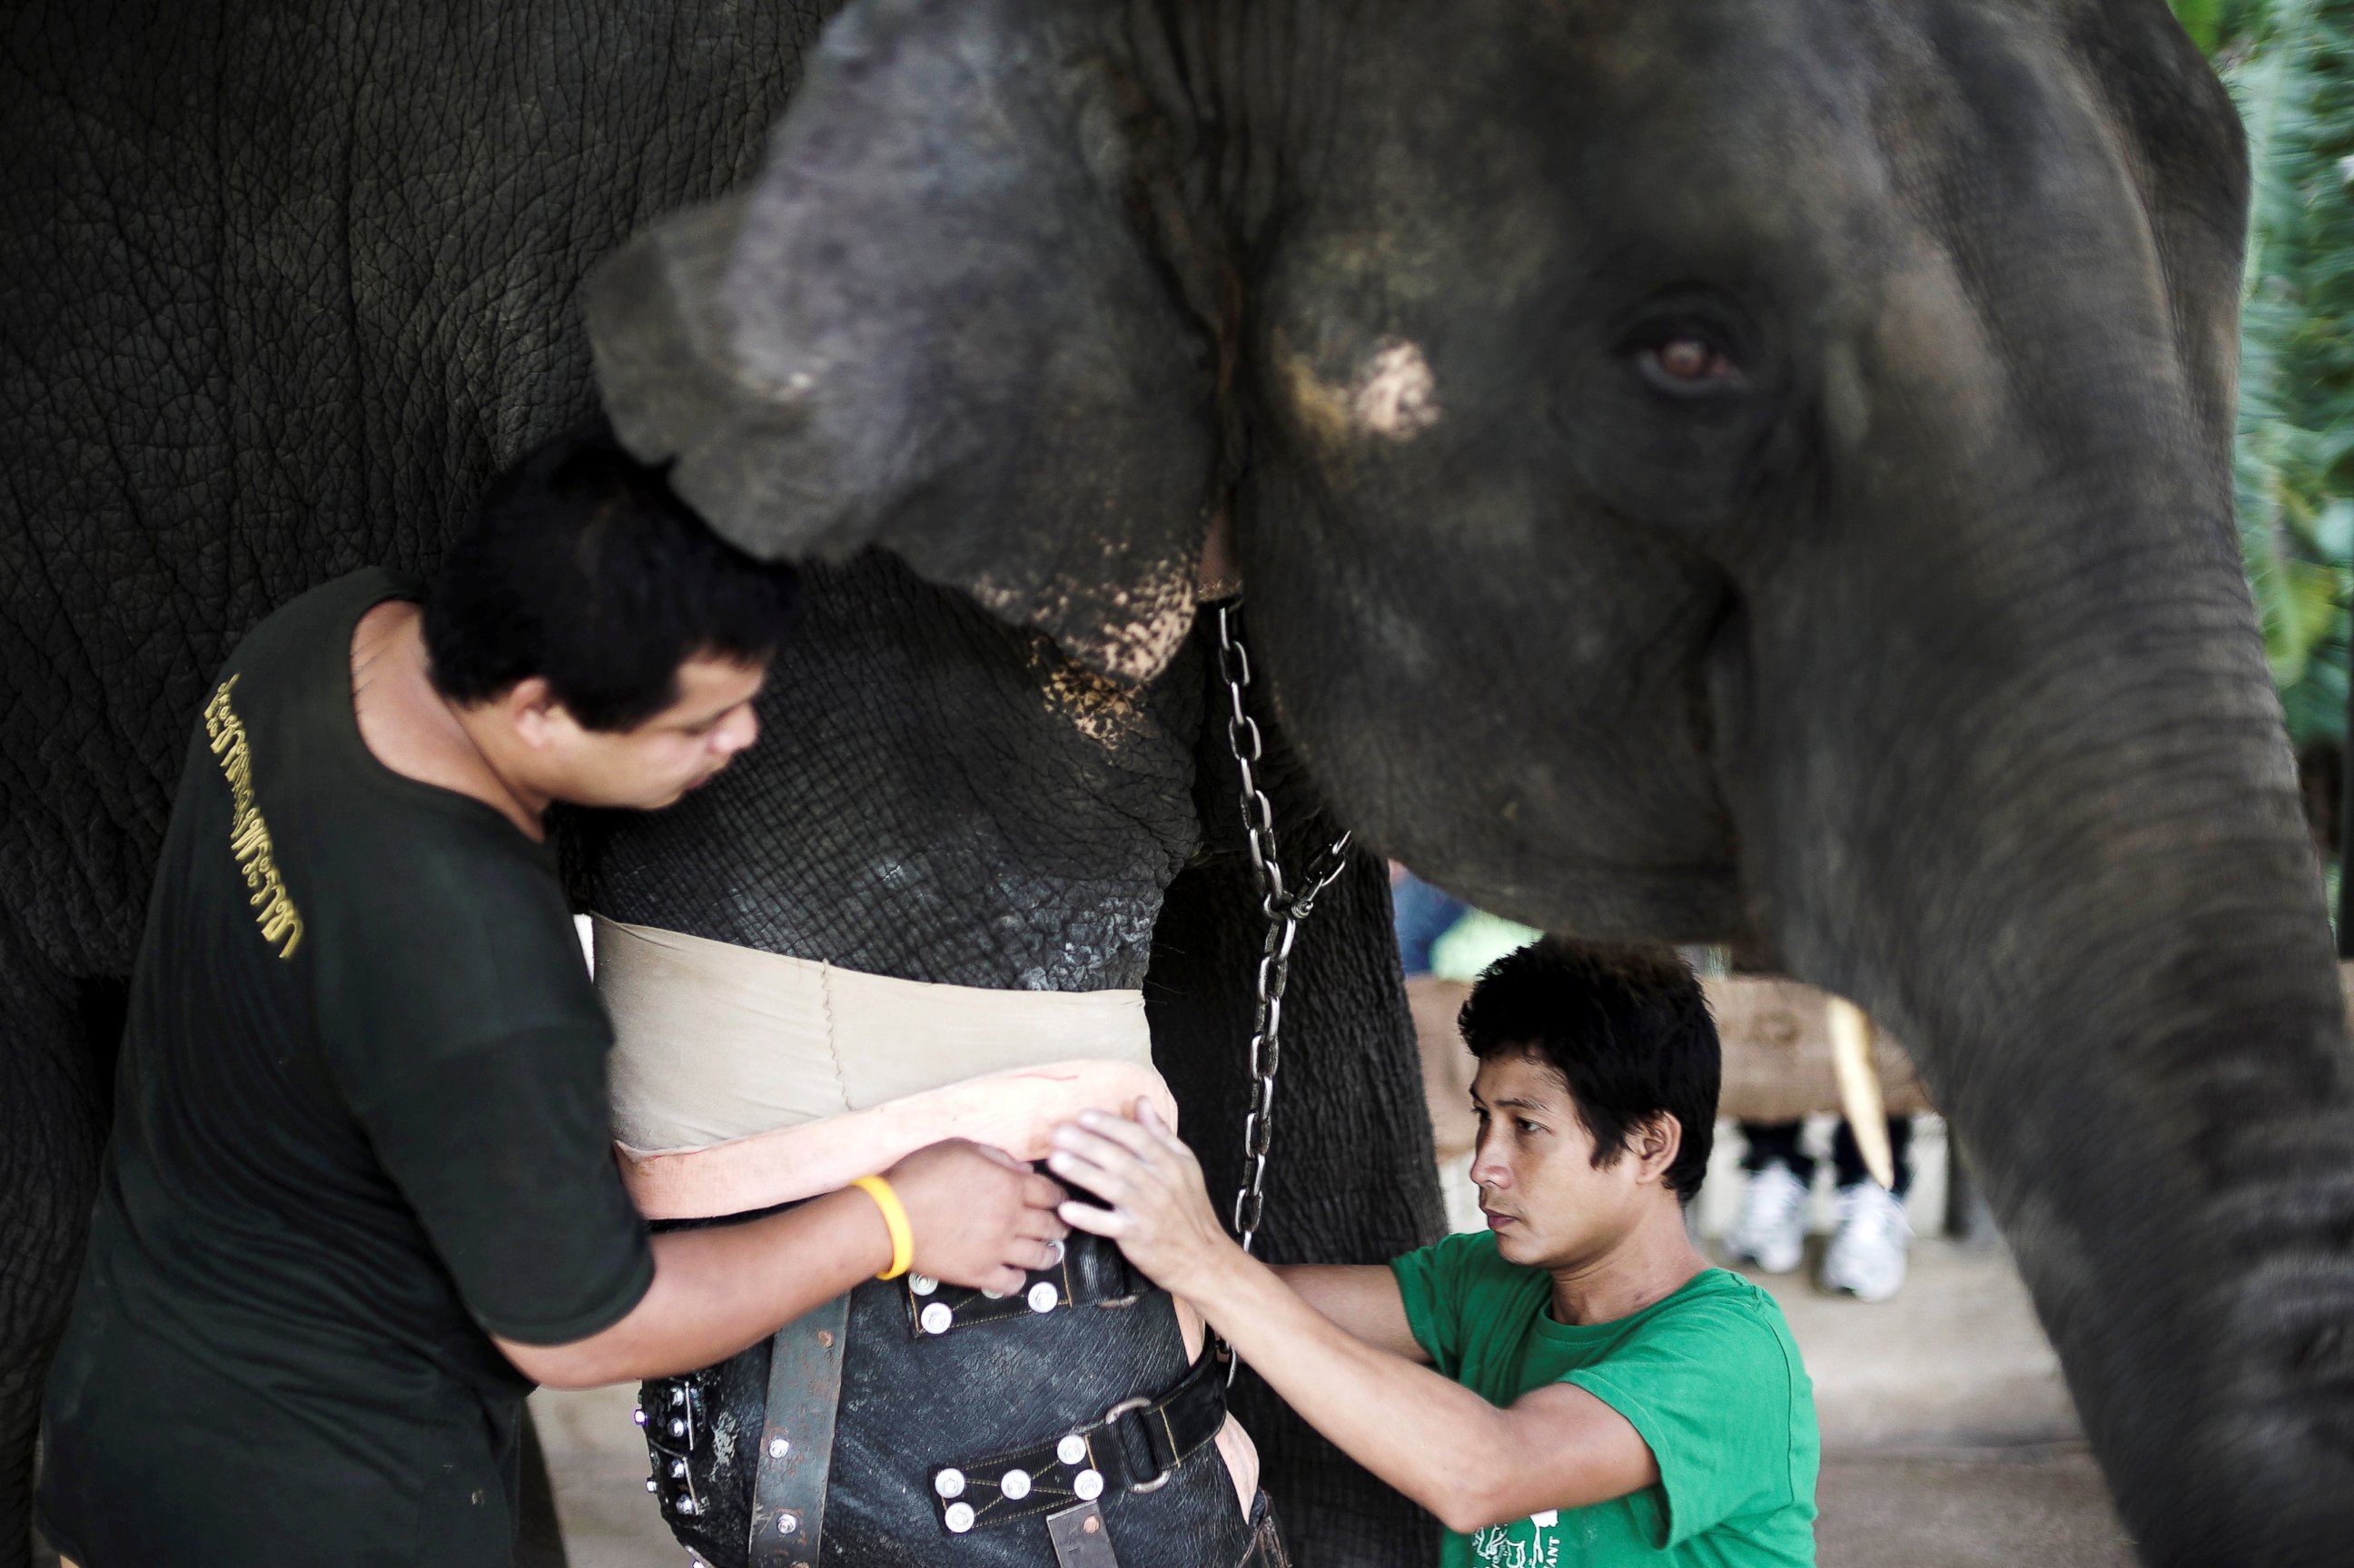 PHOTO: Mosha, the elephant that was injured by a landmine, has her prosthetic leg attached at the Friends of the Asian Elephant Foundation in Lampang, Thailand, June 29, 2016.